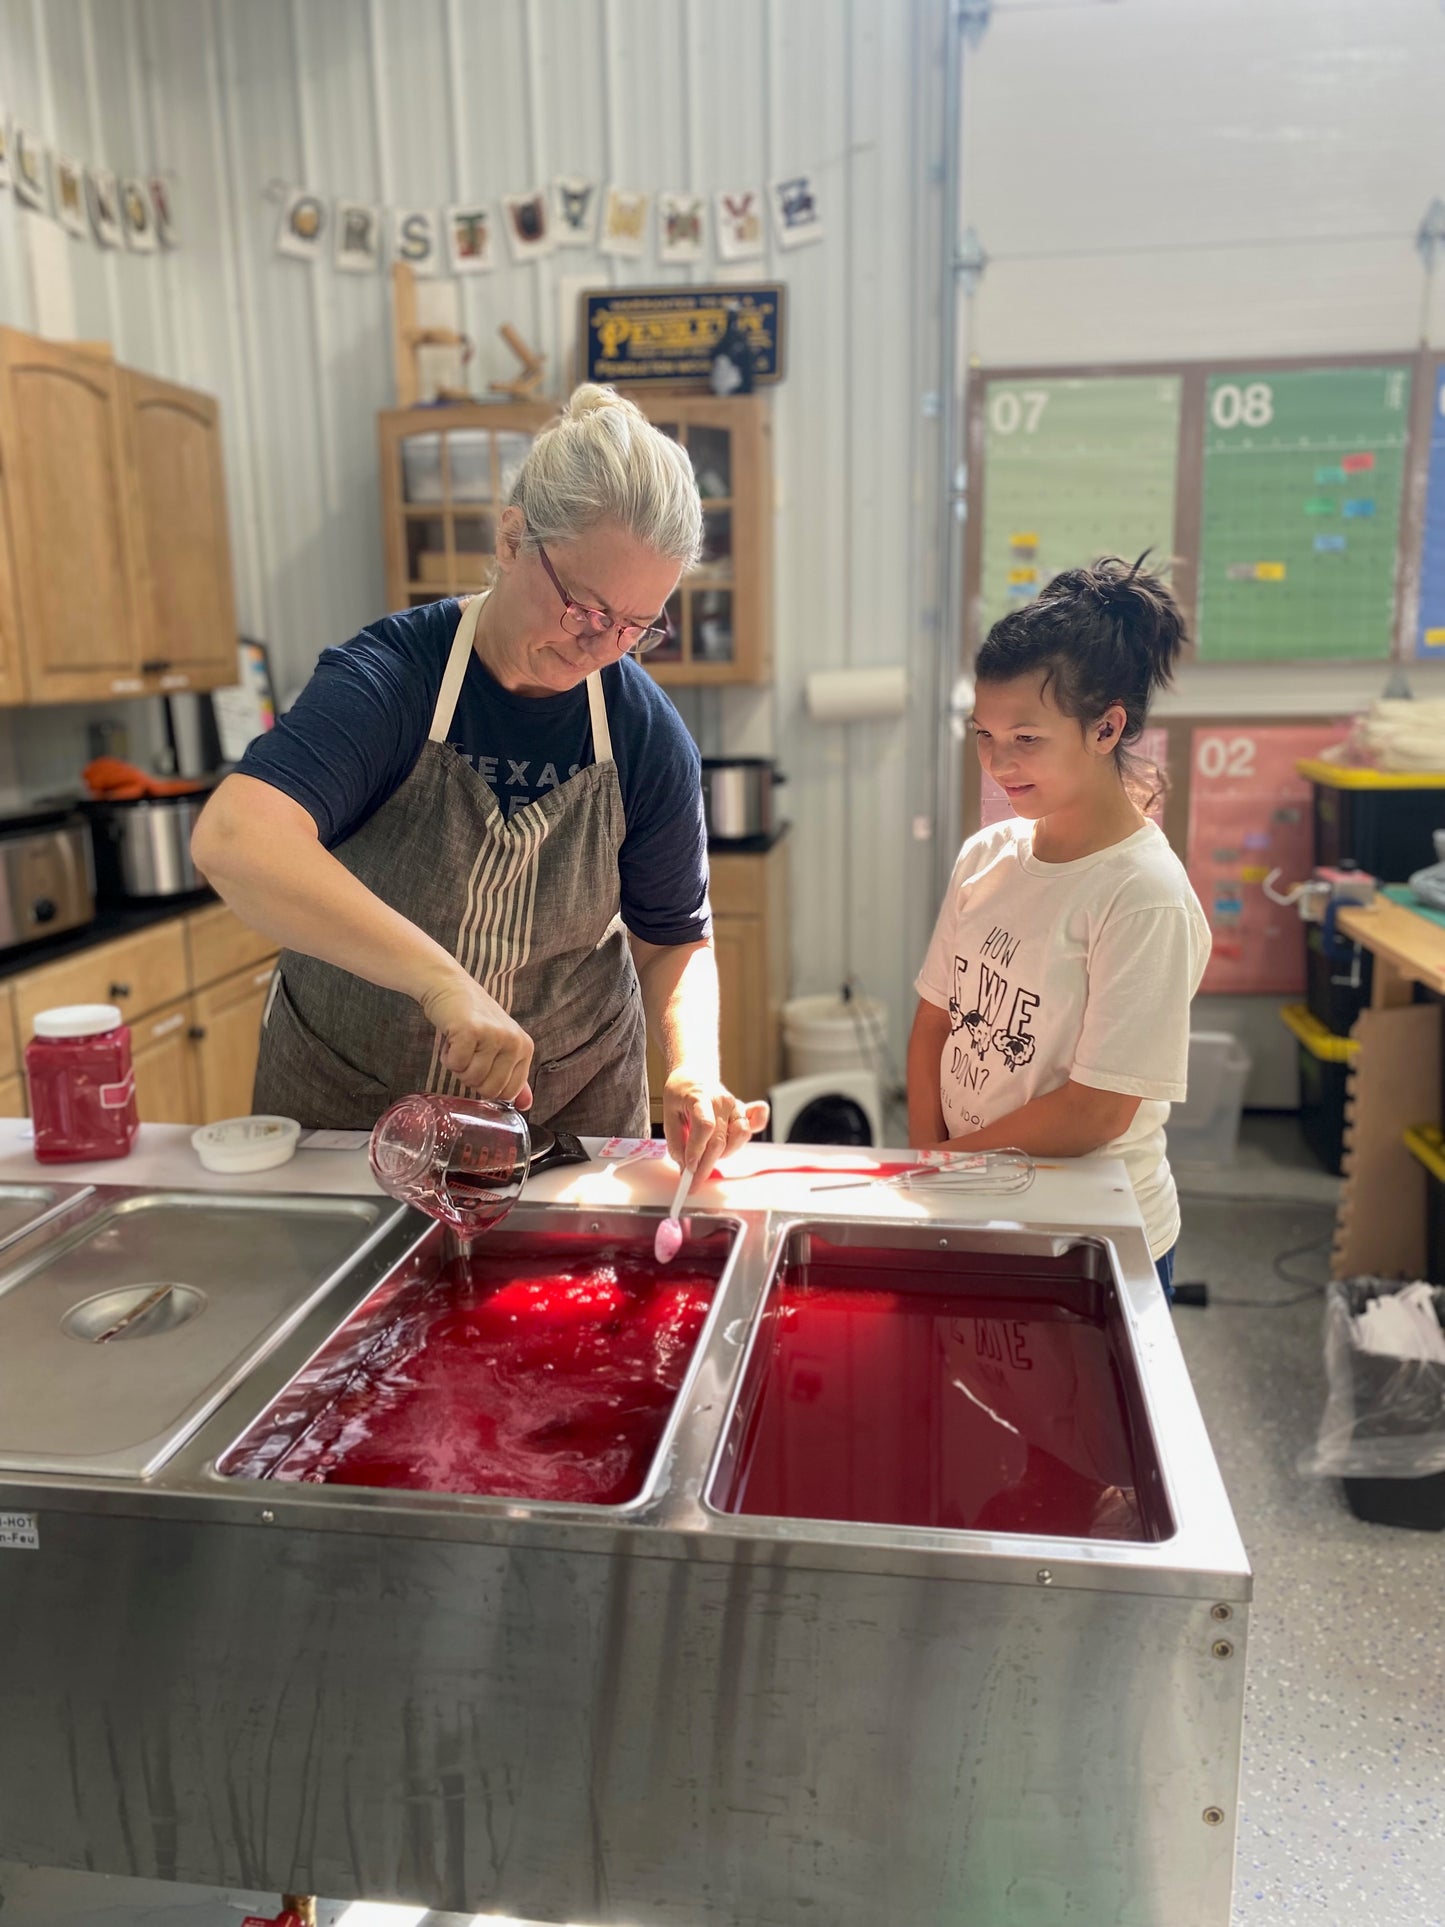 Cindy prepares a pot of dye while her granddaughter looks on